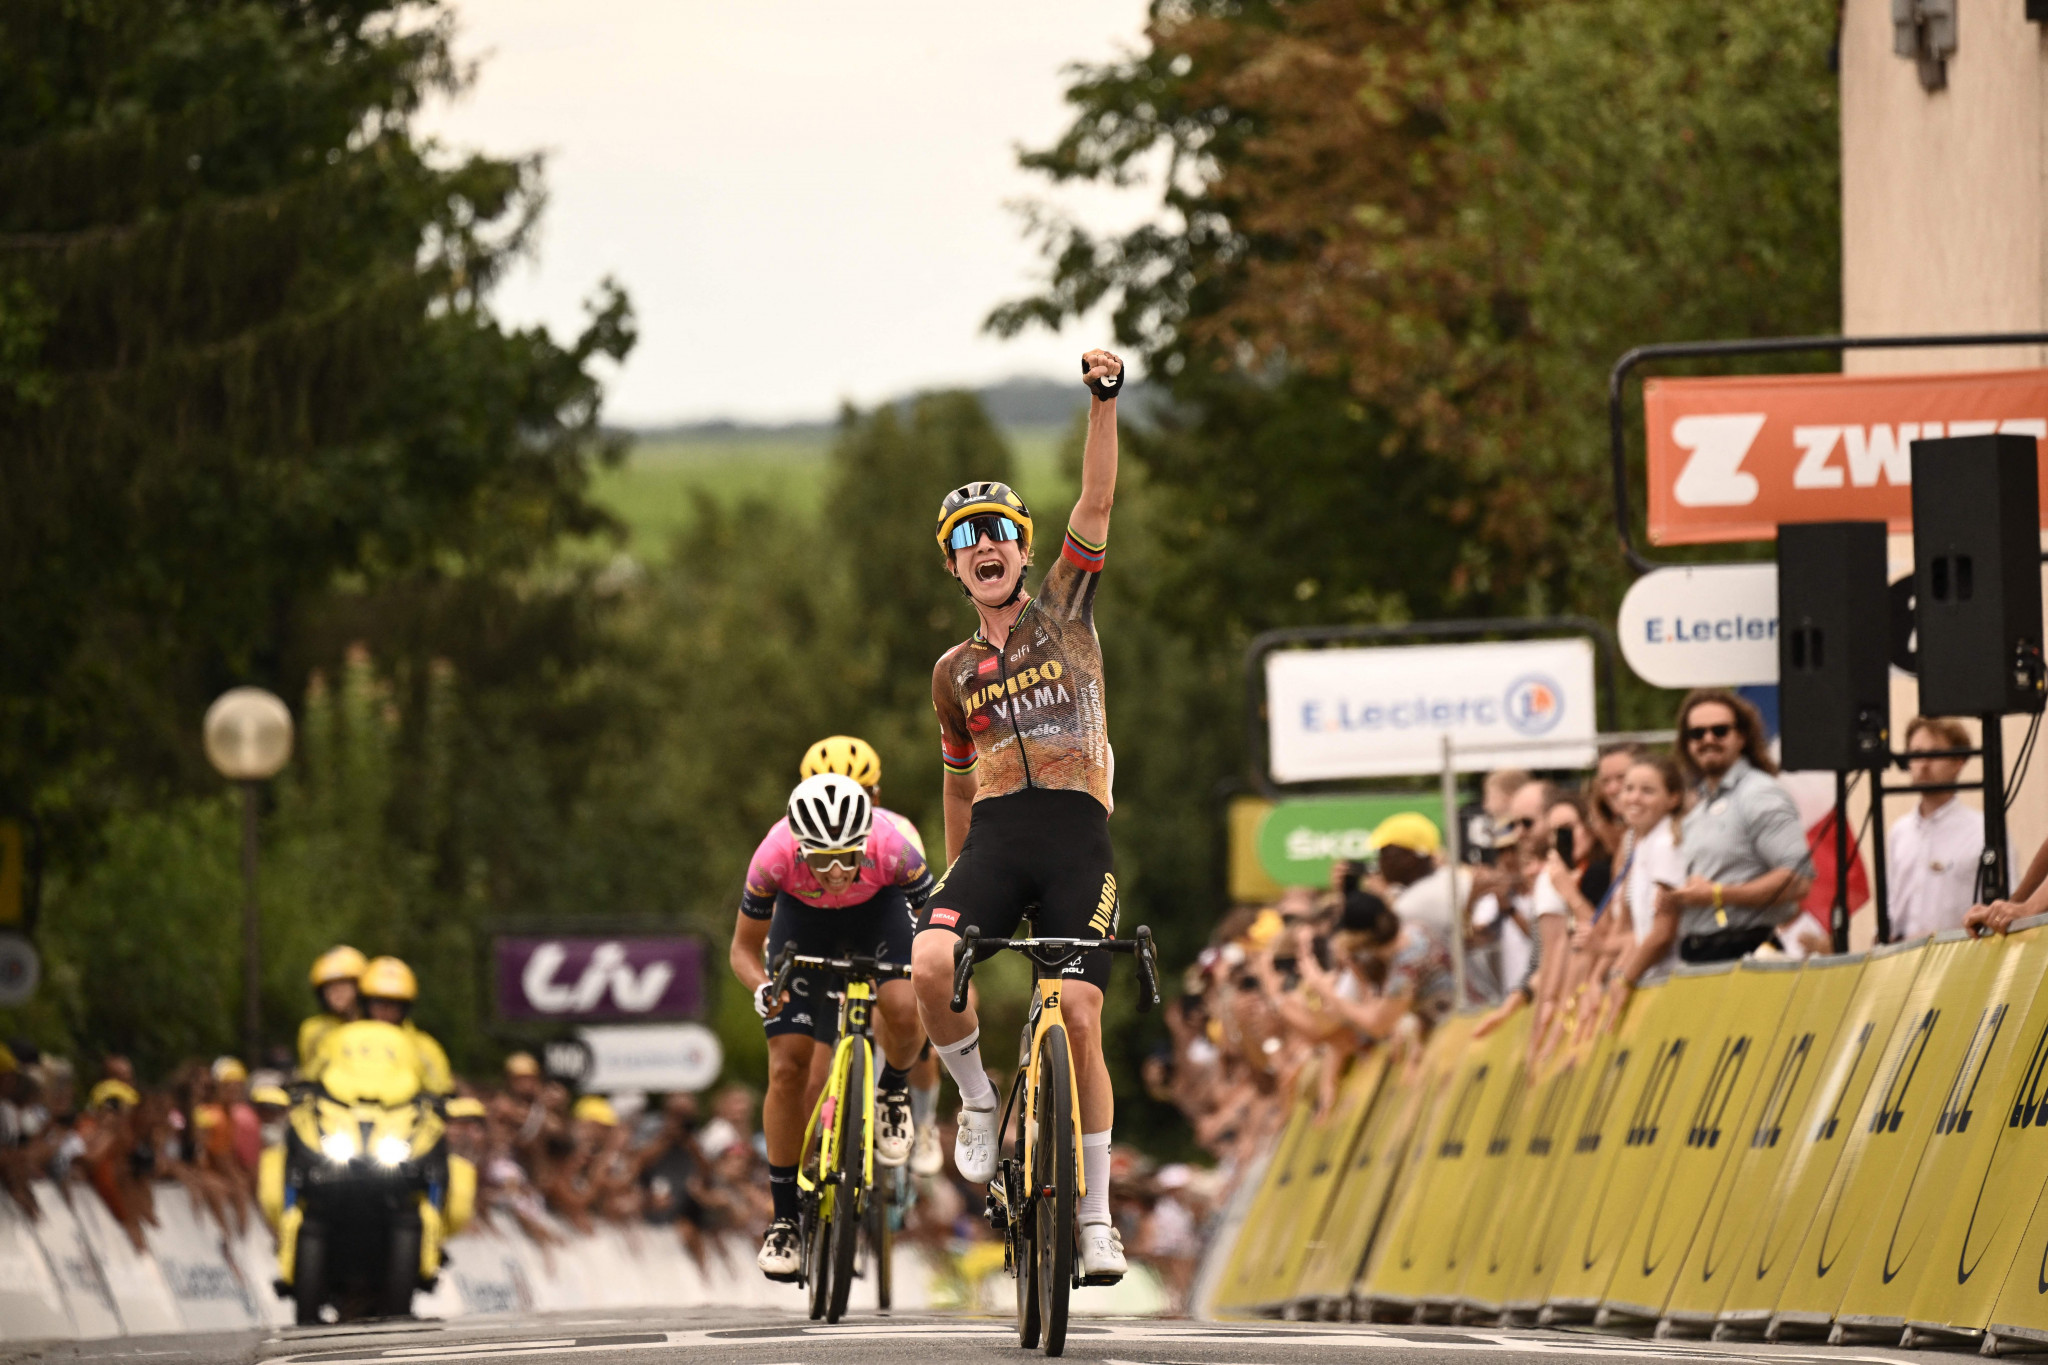 Vos wins second stage of Tour de France Femmes and claims yellow jersey